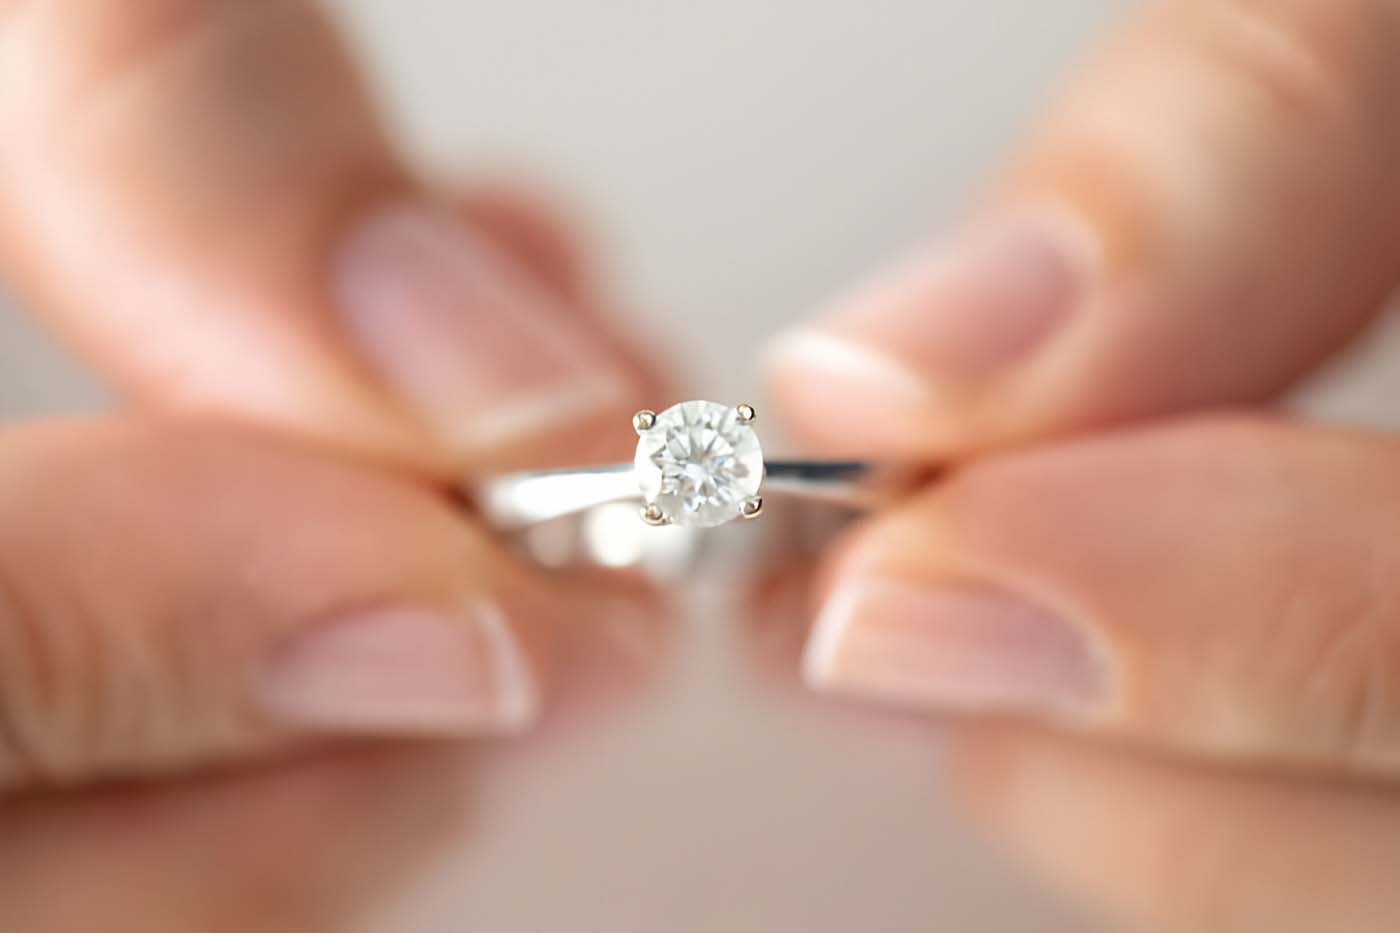 Lifestyle Matters: Valuable Considerations When Selecting an Engagement Ring